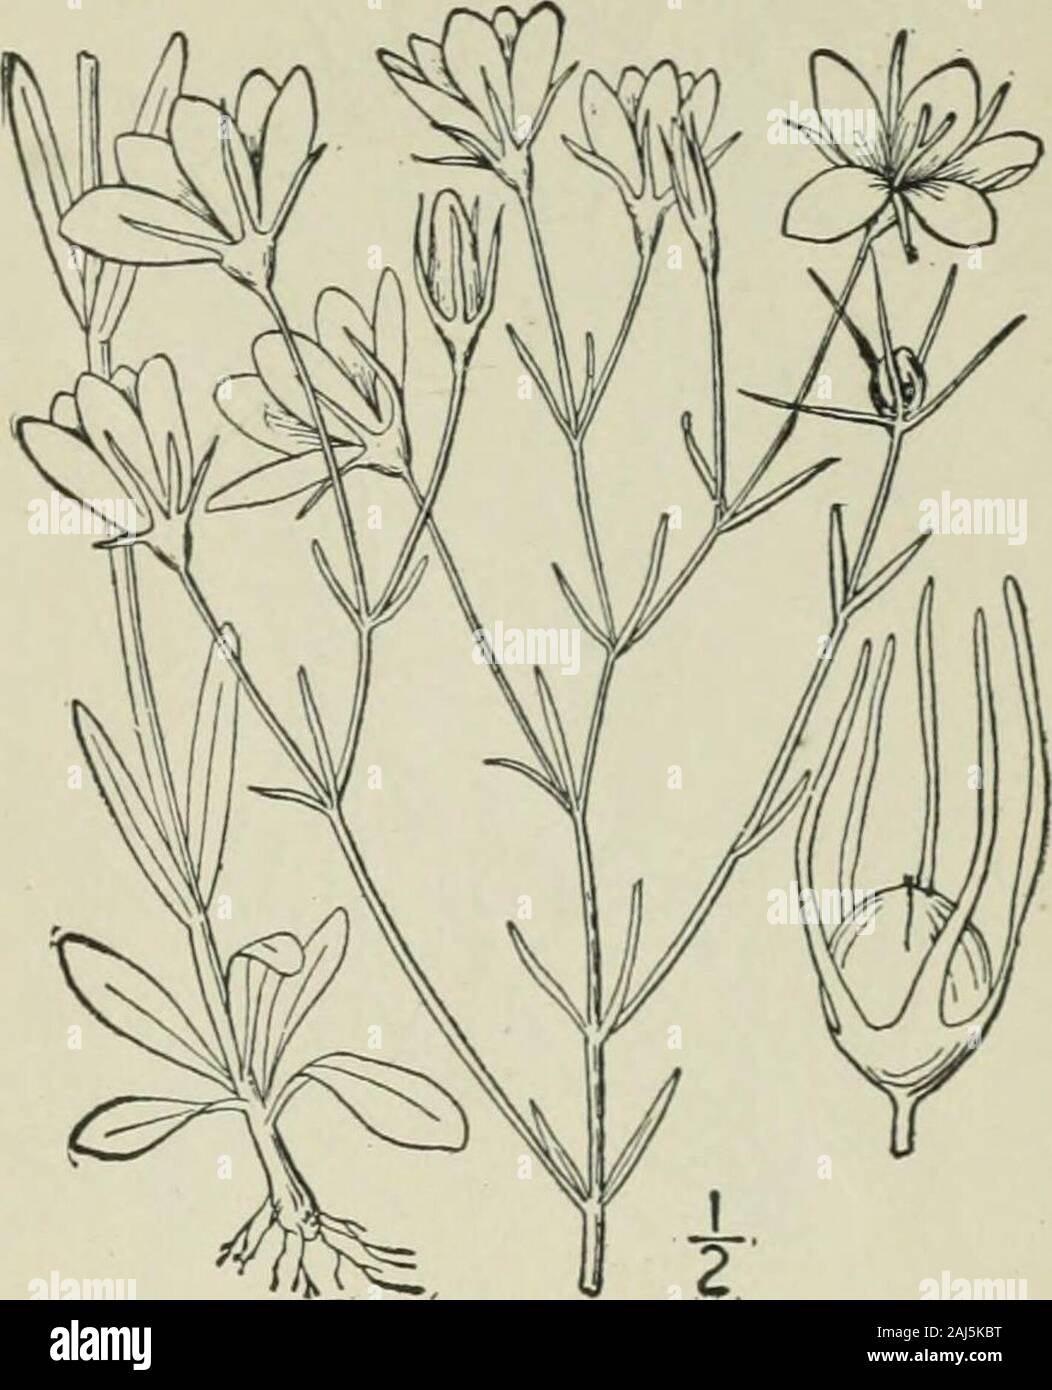 An illustrated flora of the northern United States, Canada and the British possessions : from Newfoundland to the parallel of the southern boundary of Virginia and from the Atlantic Ocean westward to the 102nd meridian . .) Torr. Slender Marsh Pink. Fig. 3344 Chironia campanulata L. Sp. PI. 190. 1753.Cliironia gracilis Michx. Fl. Bor. Am. i : 146, 1803.Sabbatia gracilis Salisb. Parad. Lond. pi. JJ. 1806.Sabbatia campanulata Torr. Fl. U. S. i: 217. 1824. Similar to the preceding species. Stem usuallyverj slender and much branched, i°-2° high, thebranches ahernate. Leaves linear, or linear-lan-c Stock Photo